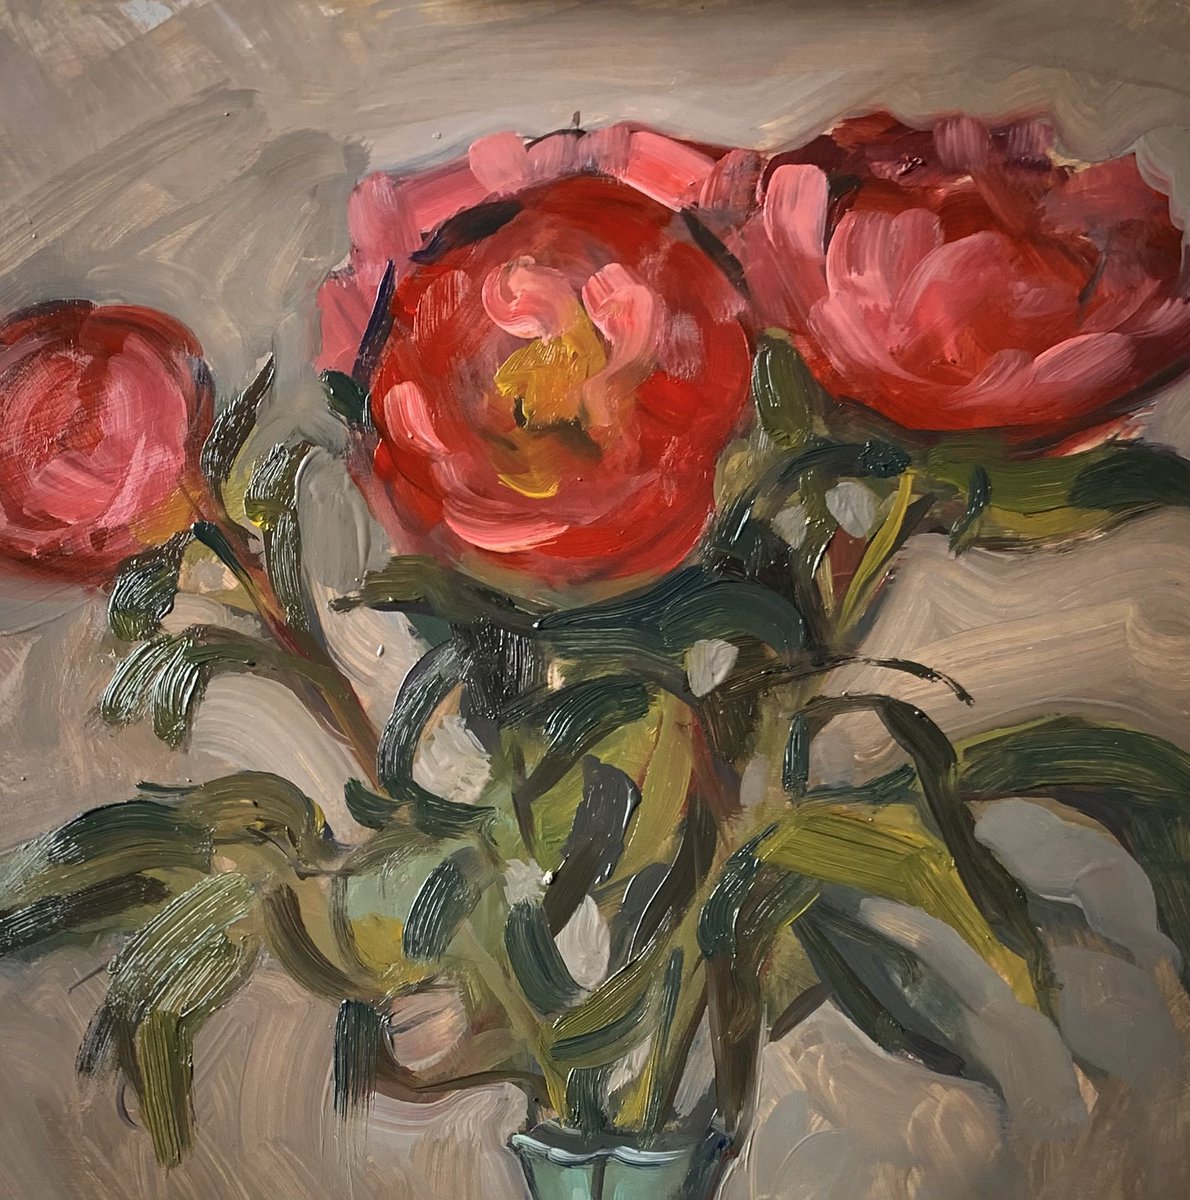 In the search of keeping it simple I focused on this vase of peonies. Lessons to be learned. Stage  #art #painting #paintinglessons #artlessons #artlessonssuffolk #suffolk #stilllife #dailysketch #oilpaint